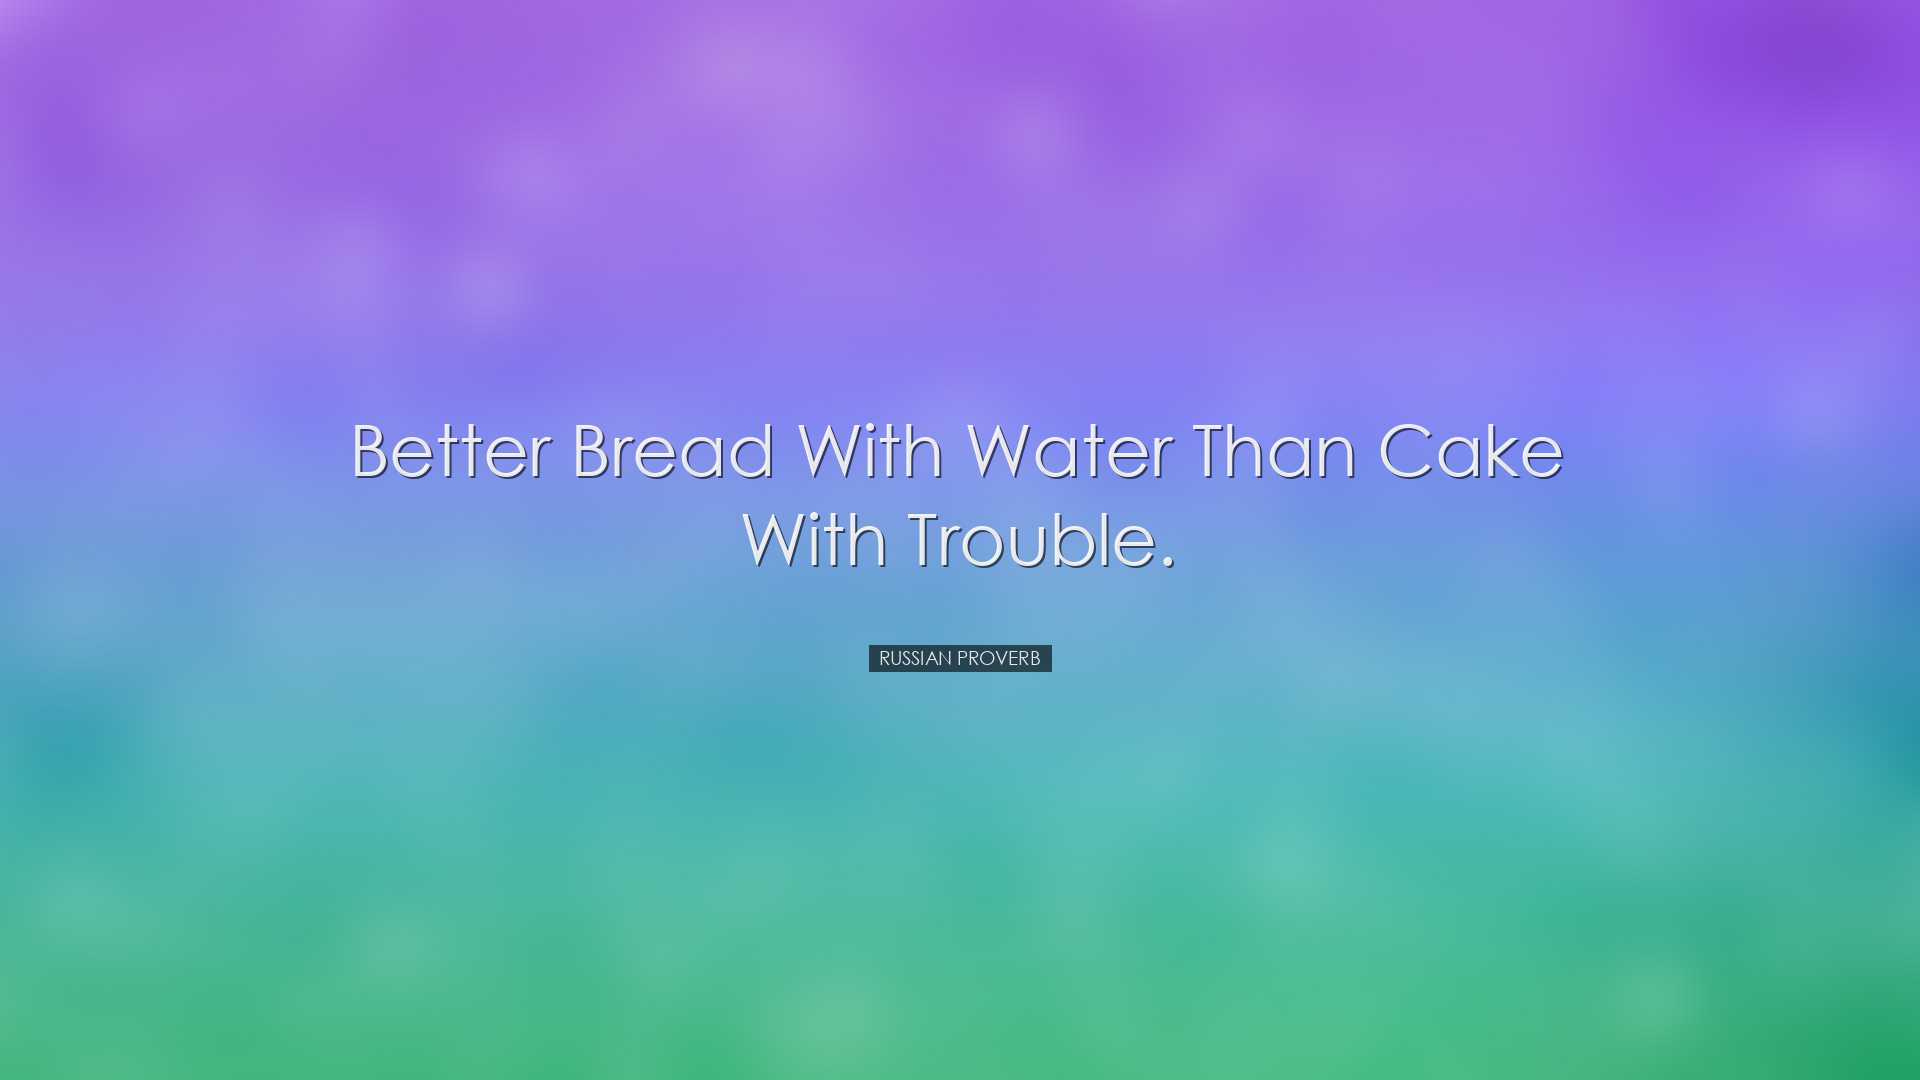 Better bread with water than cake with trouble. - Russian Proverb